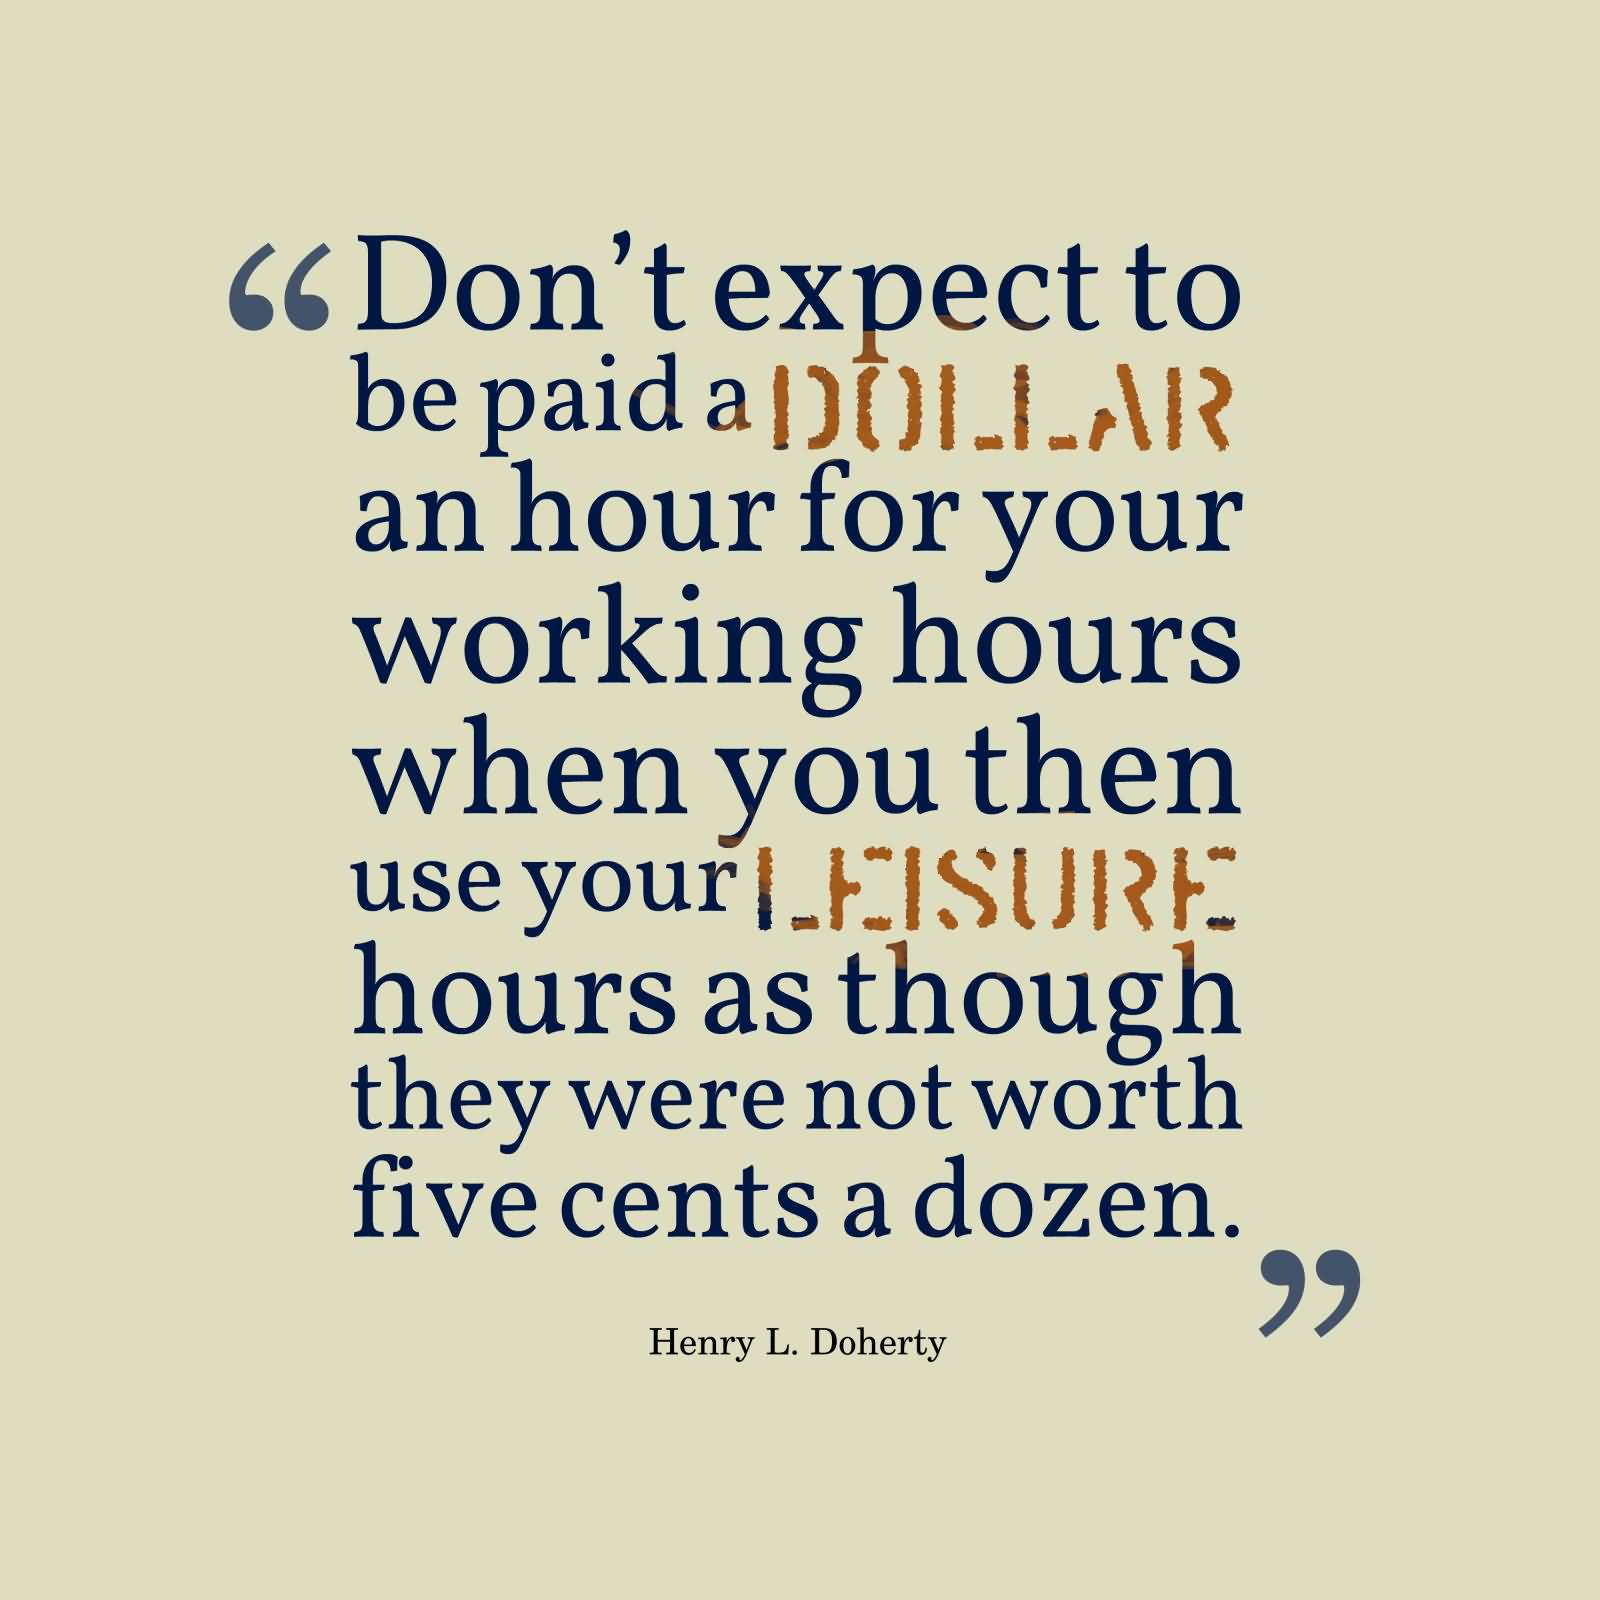 Don’t expect to be paid a dollar an hour for your working hours when you then use your leisure hours as though they were not worth five cents … Henry L. Doherty